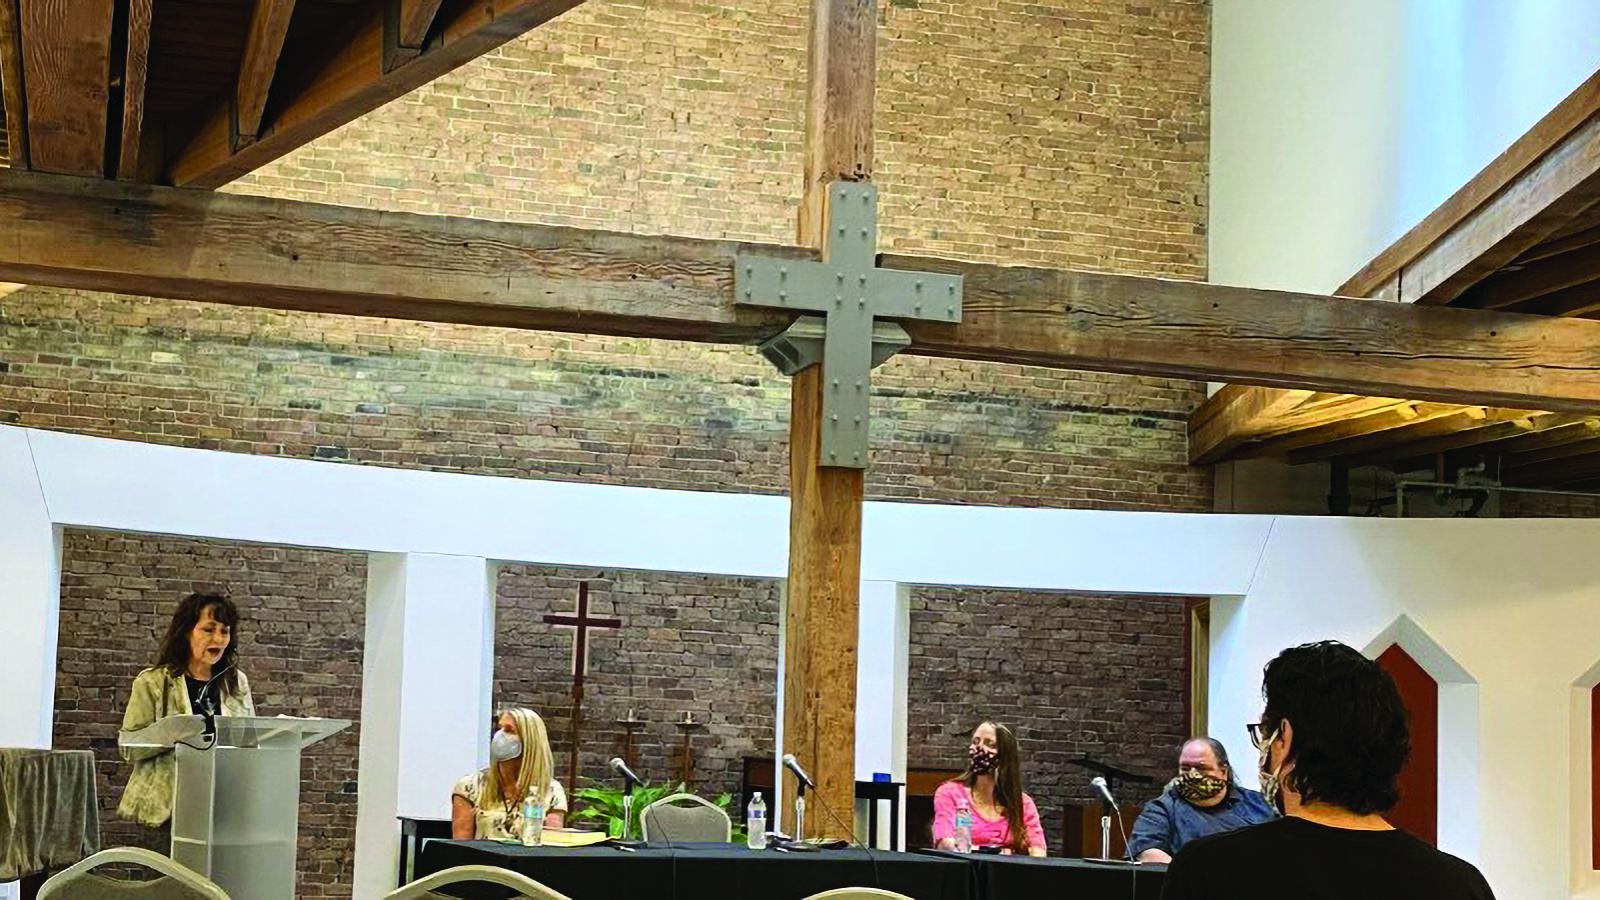 Woman reading from podium in a church with large crucifix showing. 